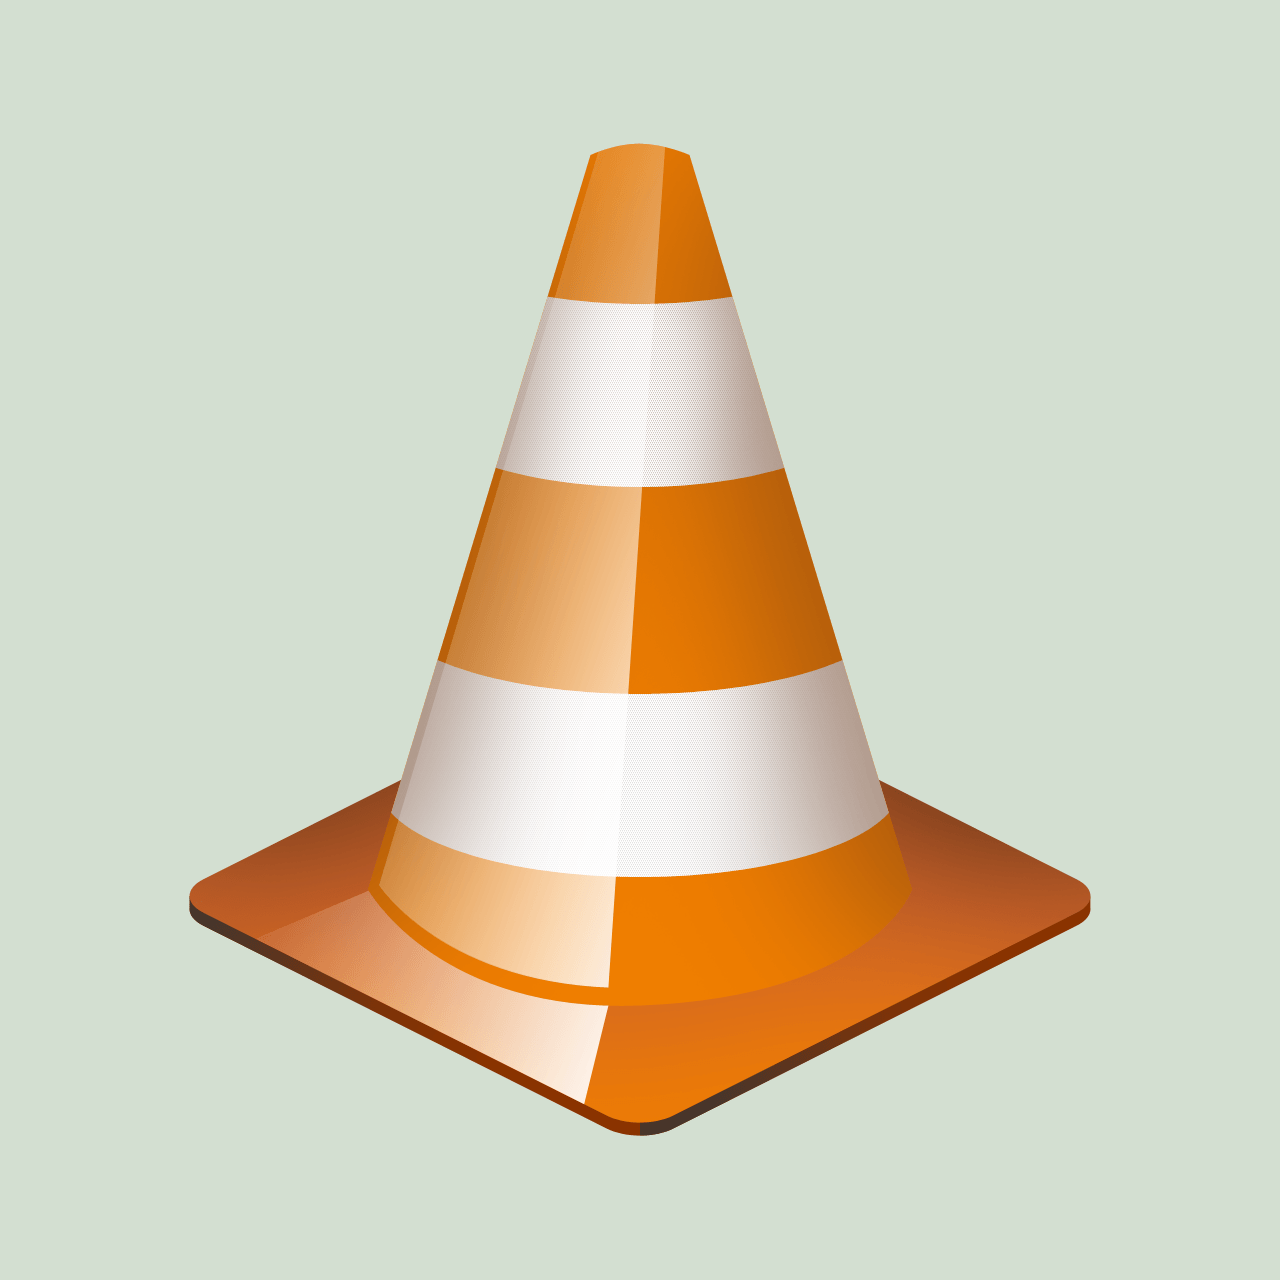 Construction Cone Logo - Traffic Cone Icon by Chicot101 on DeviantArt